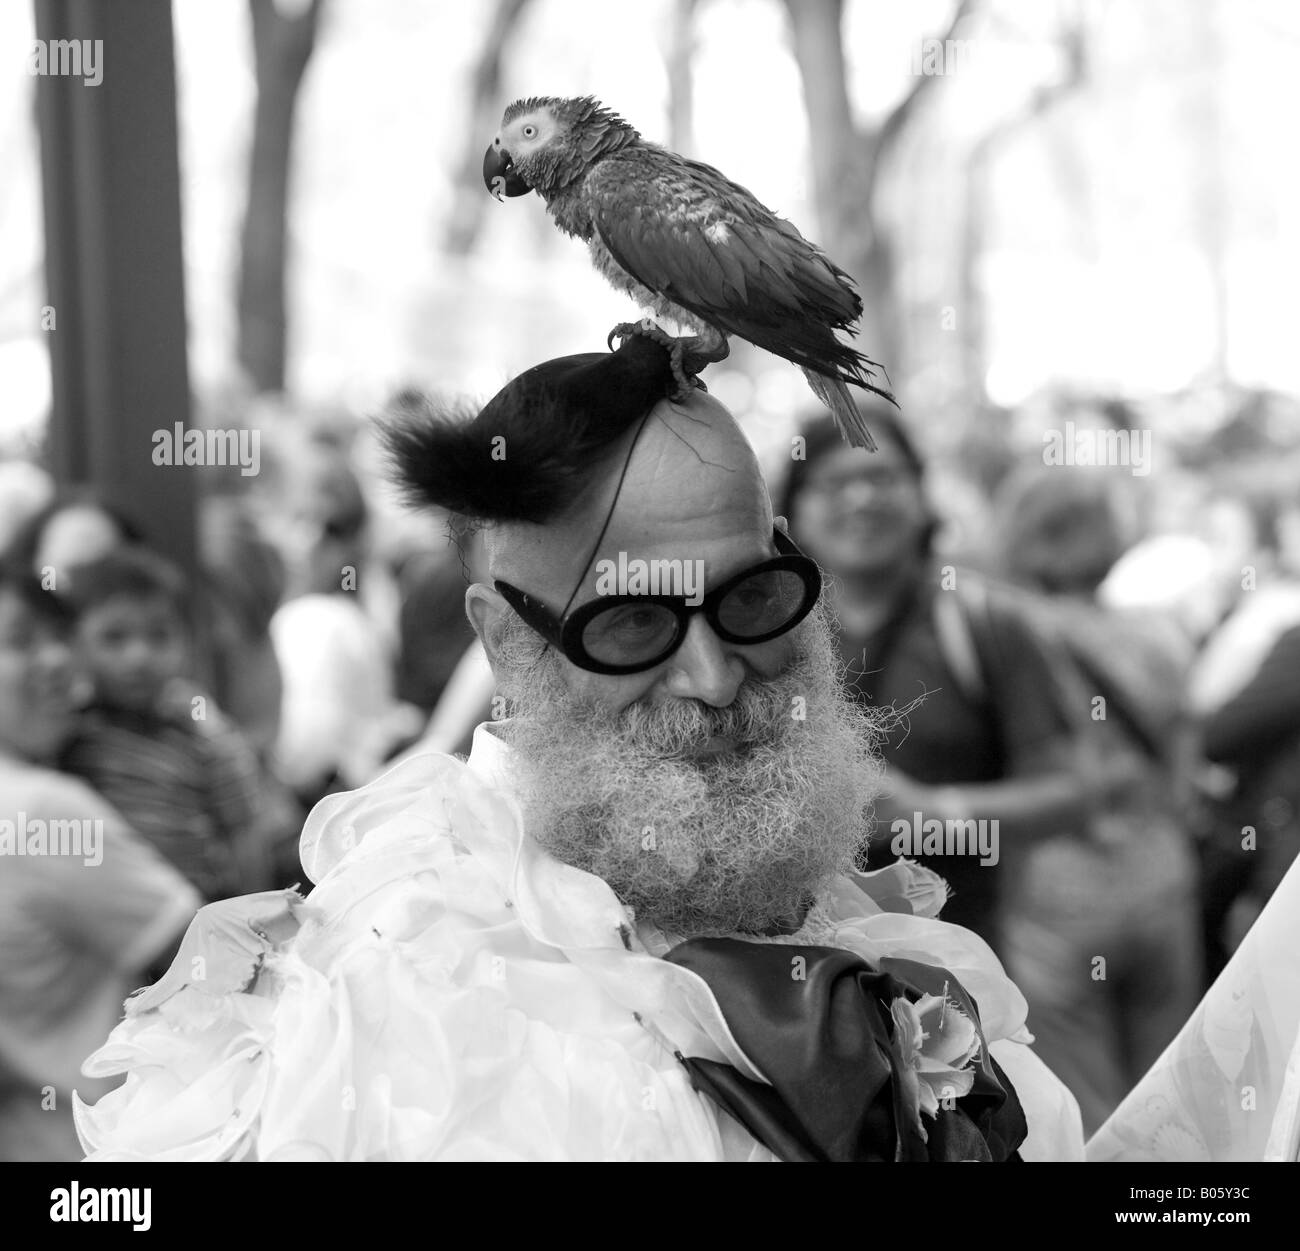 A unique street performer in New York City with a bird on his head Stock Photo